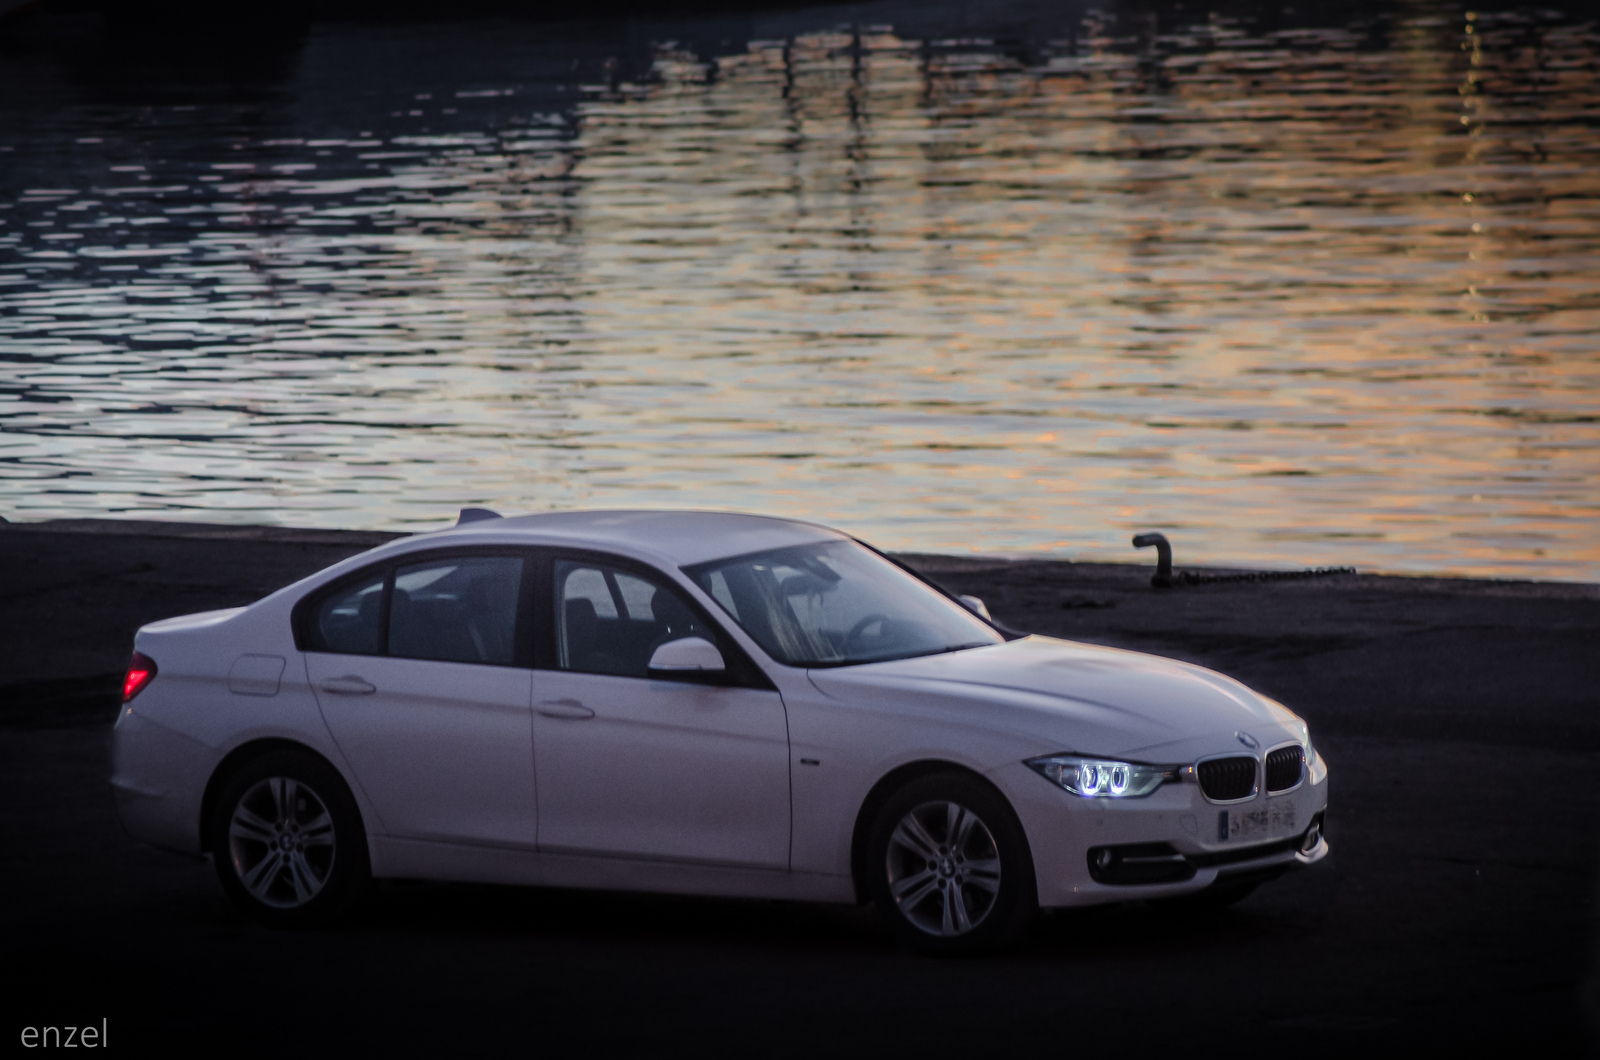 Bmw 320 f30 at the harbour 4 | Flickr - Photo Sharing!